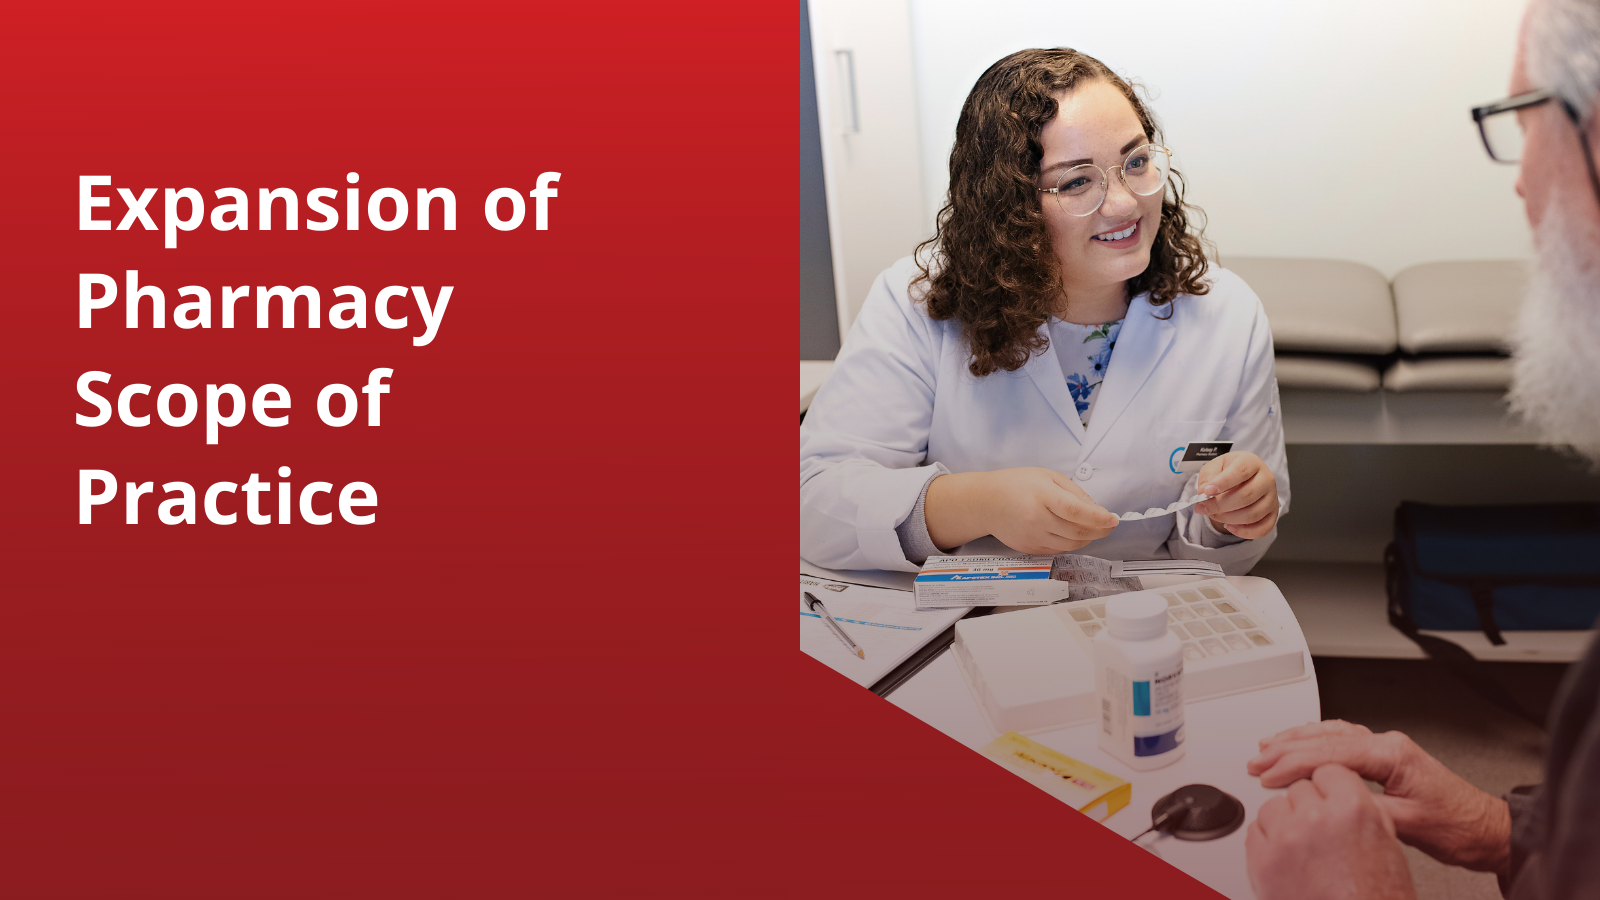 Expansion of Pharmacy Scope of Practice